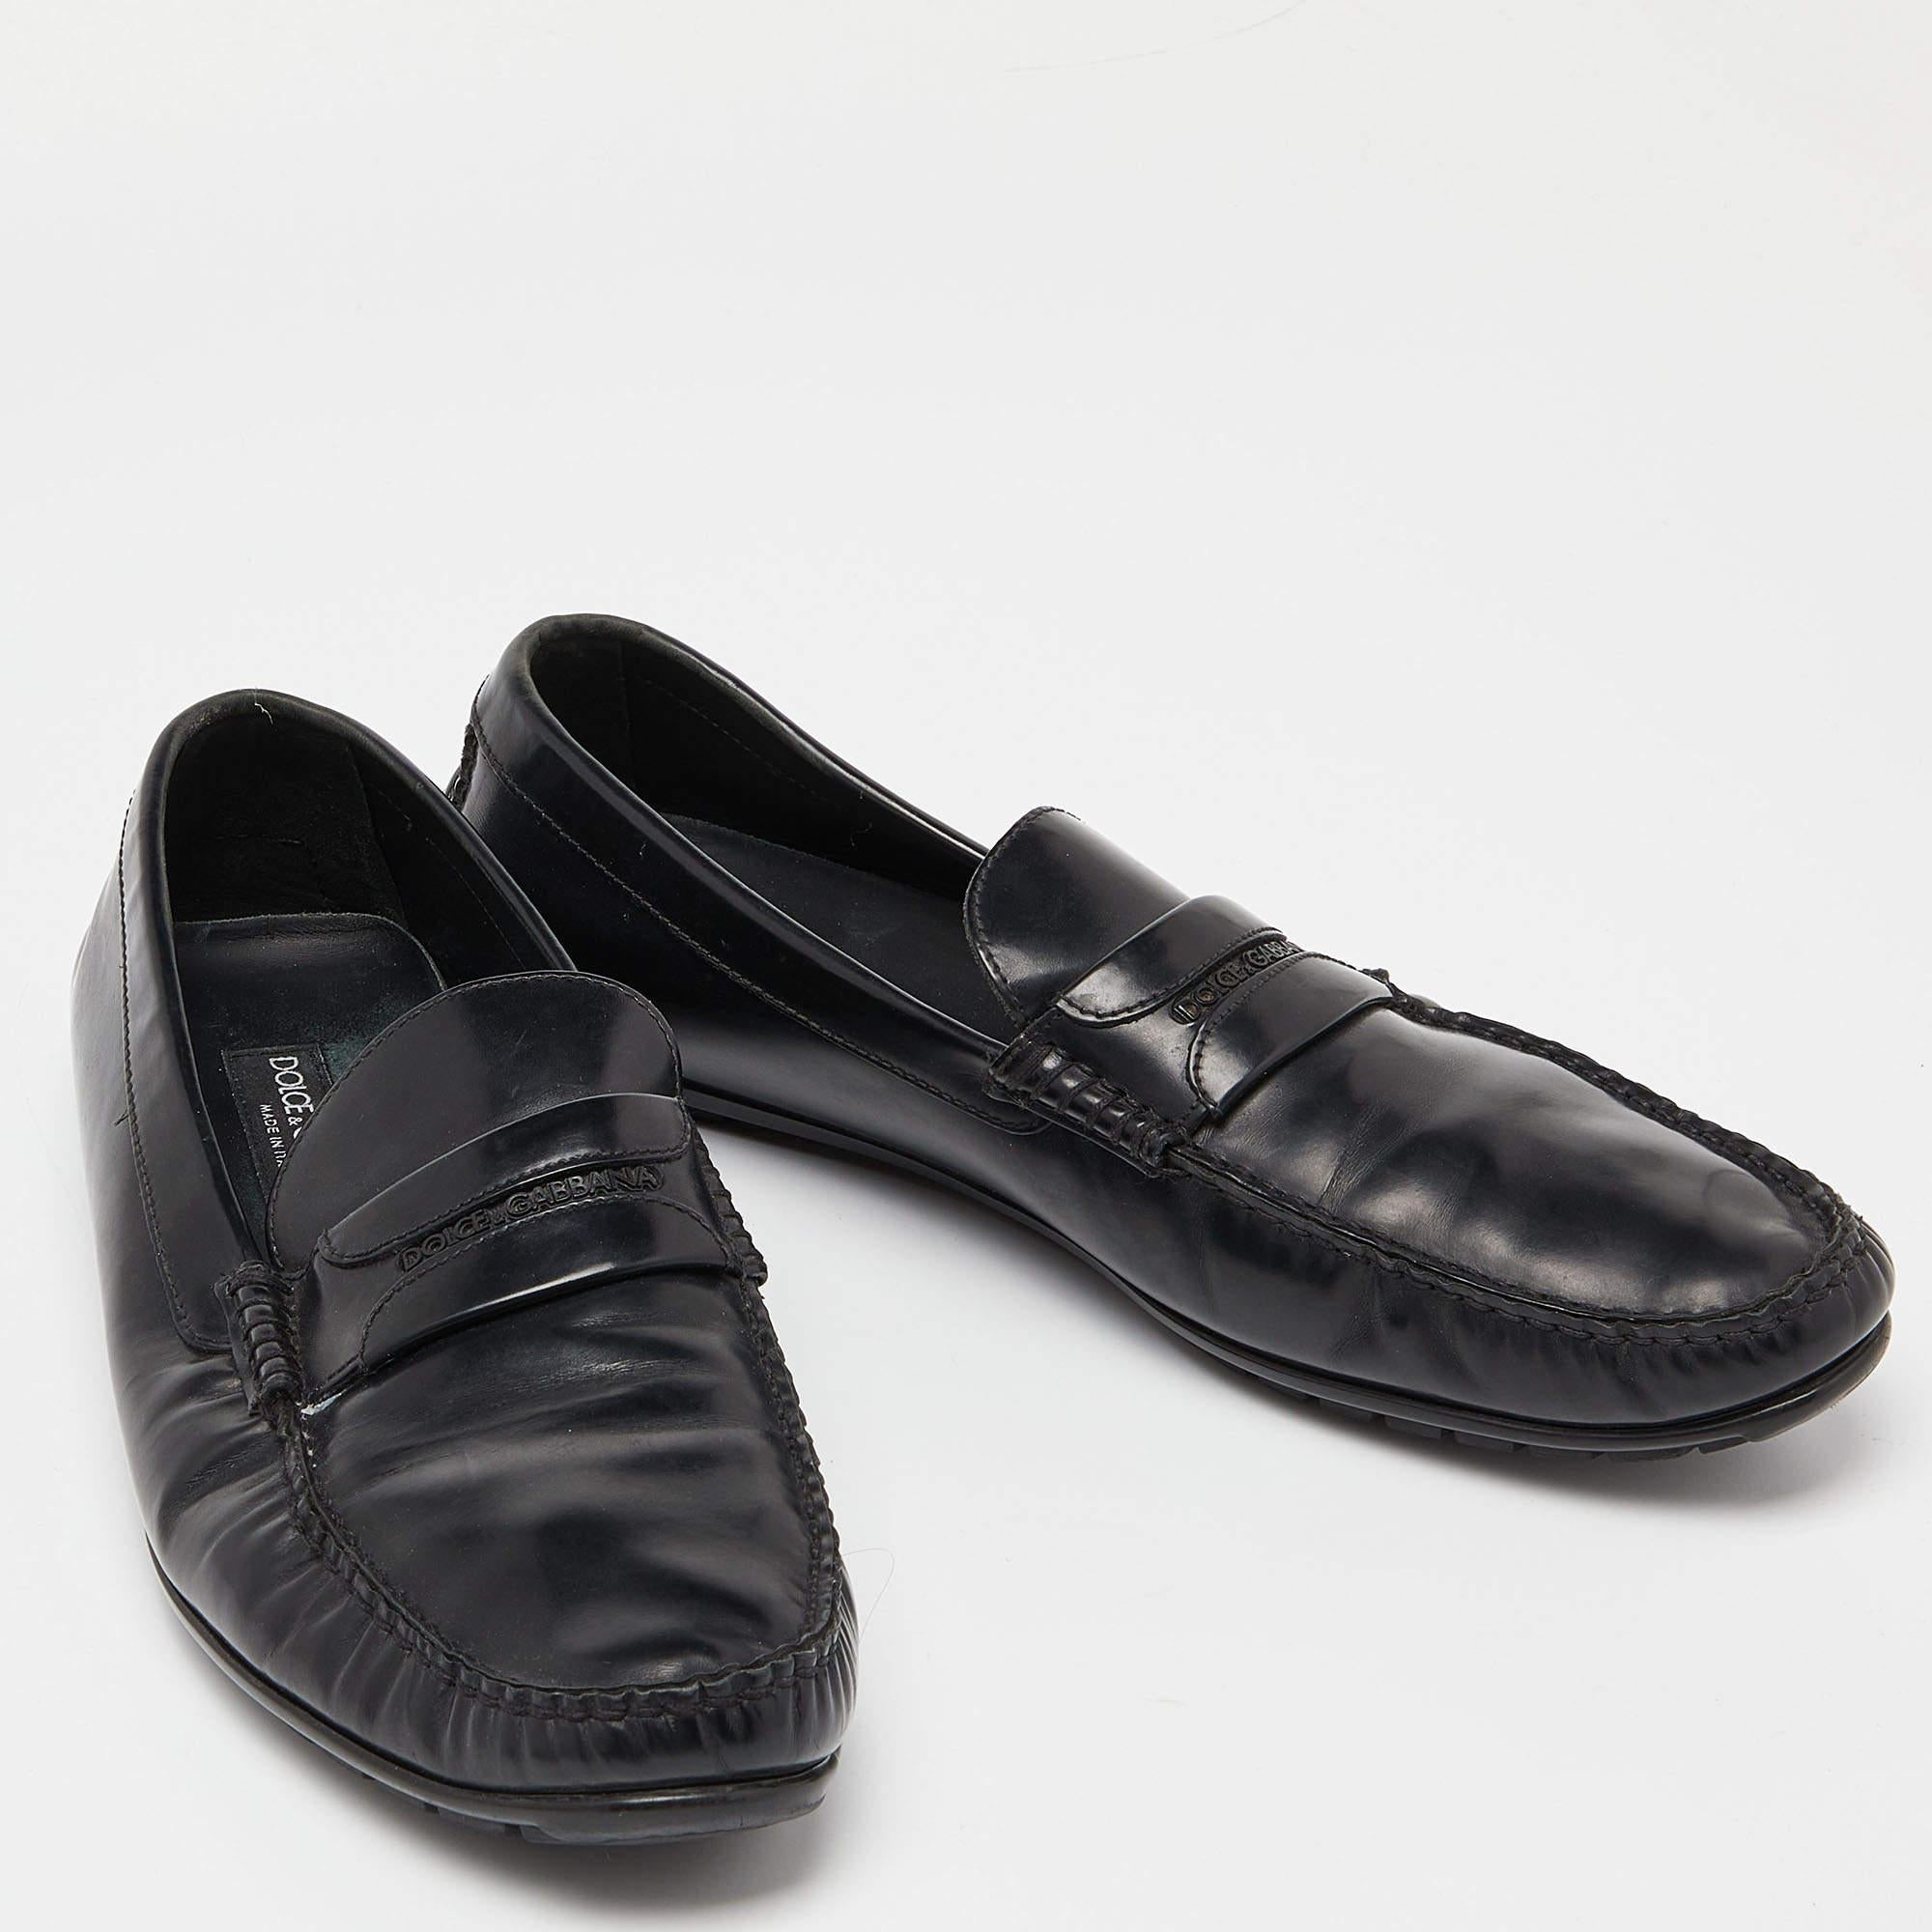 Dolce & Gabbana Black Leather Slip On Loafers Size 44.5 For Sale 1